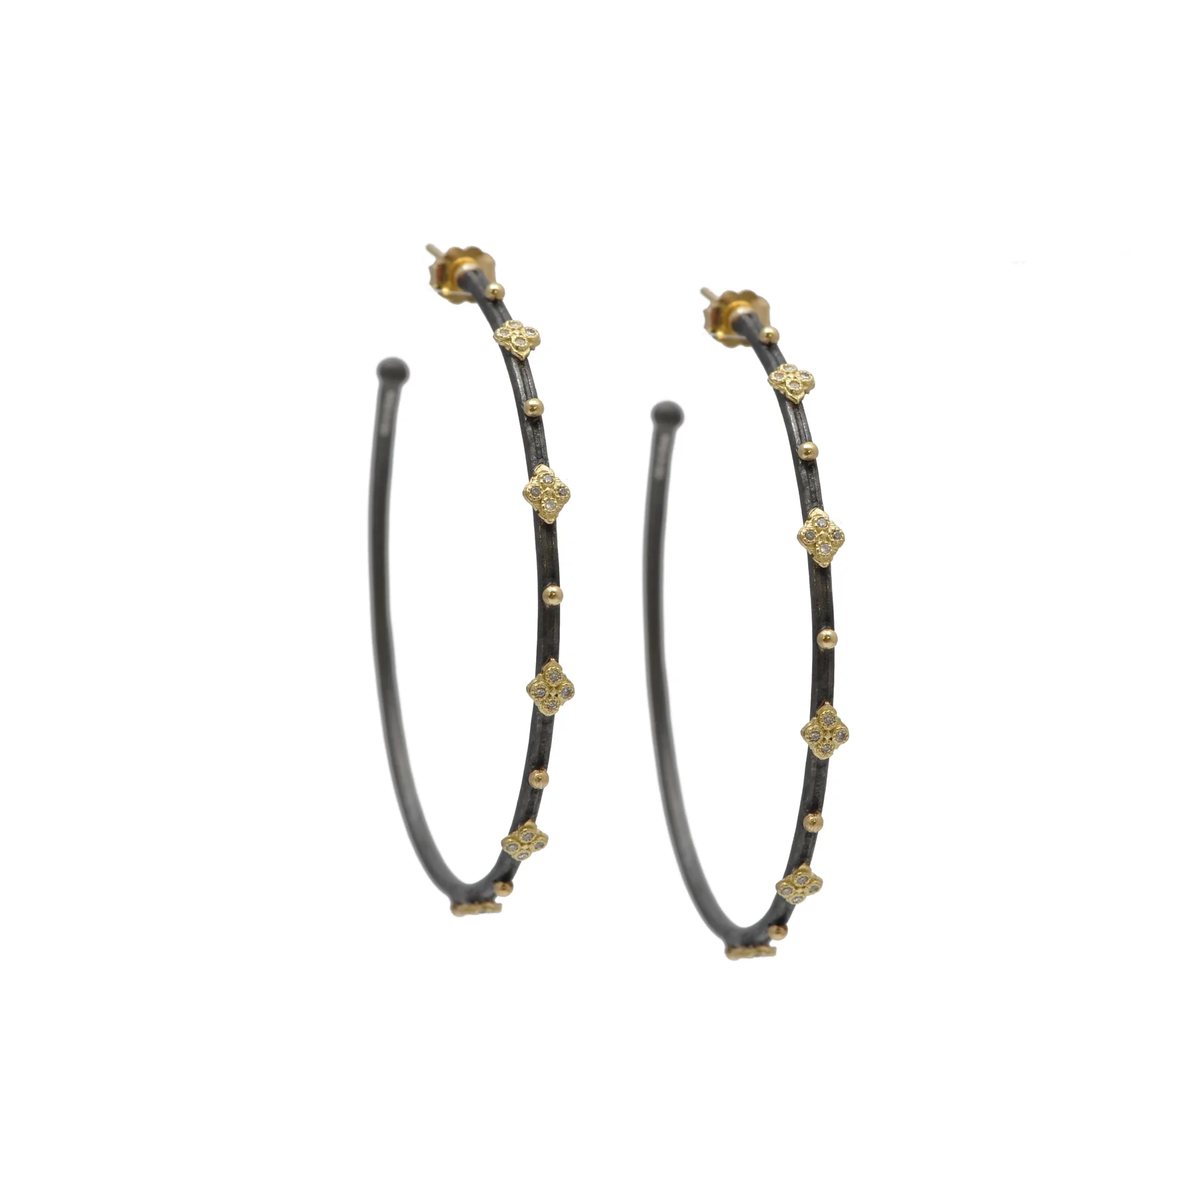 Blackened Sterling Silver and Gold Crivelli Diamond Hoop Earrings, Sterling silver and 18k yellow gold', Long's Jewelers